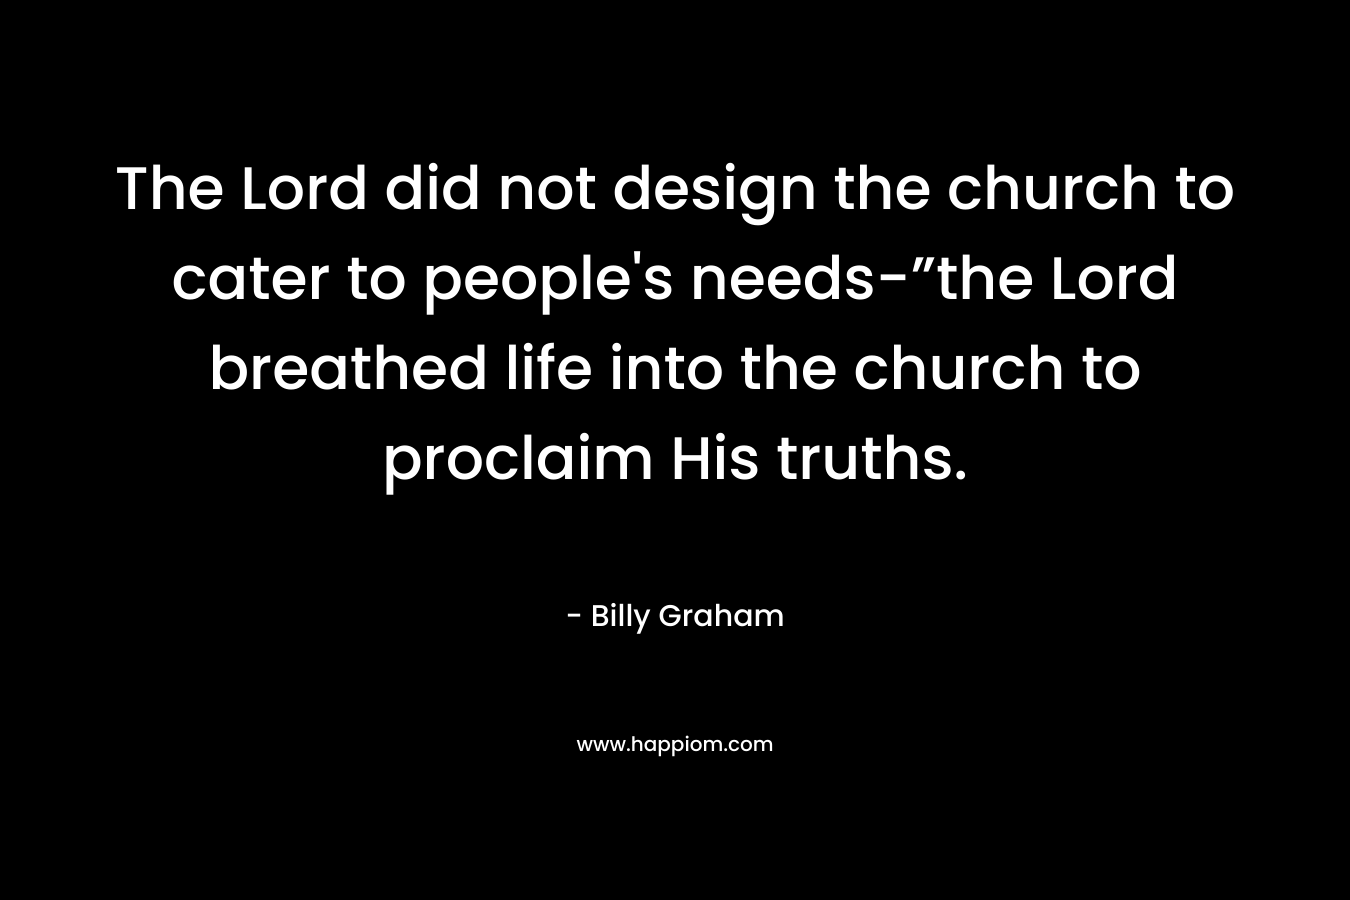 The Lord did not design the church to cater to people's needs-”the Lord breathed life into the church to proclaim His truths.